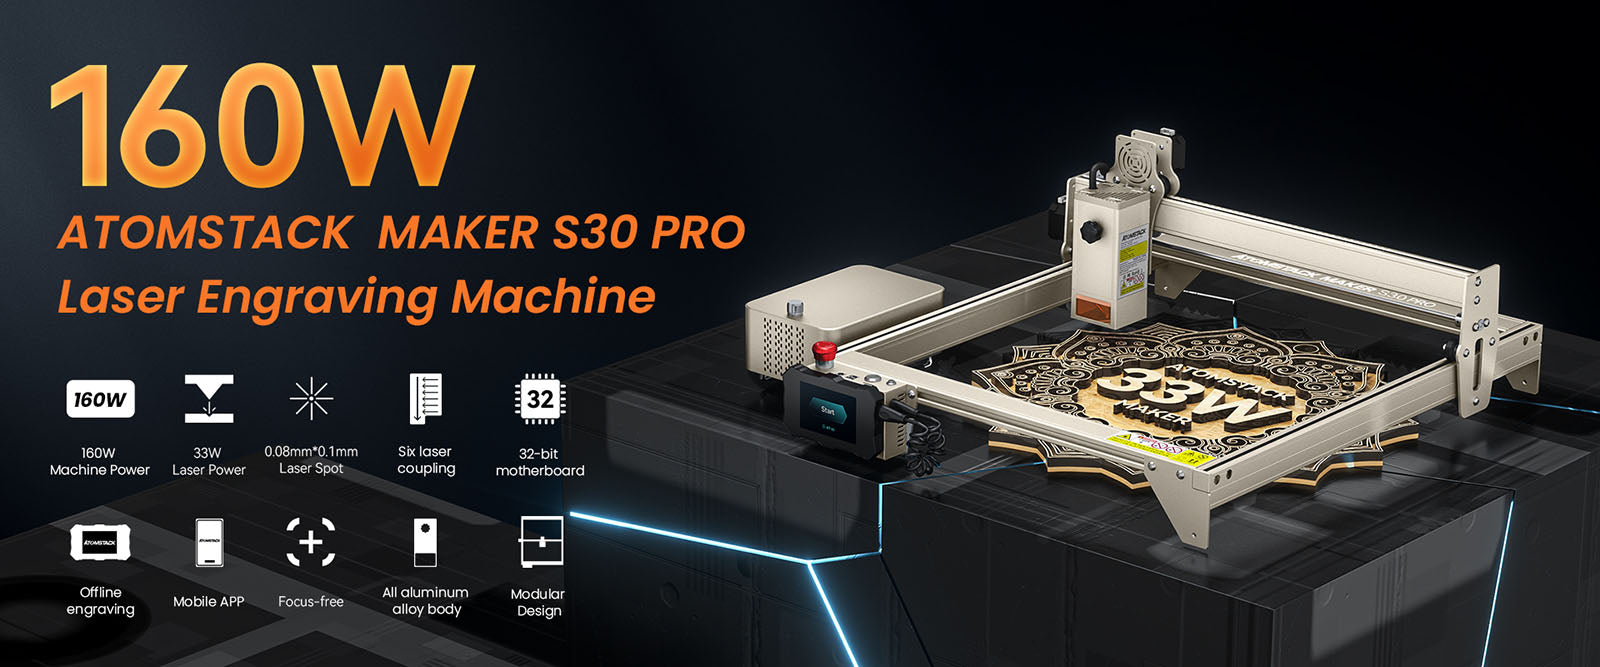 Atomstack S30 PRO Laser Engraver Fixed Focus 33W Laser Power 400x400mm  Engraving Area 6-core Laser Engraving DIY Cut Machine - ChiTu Systems!